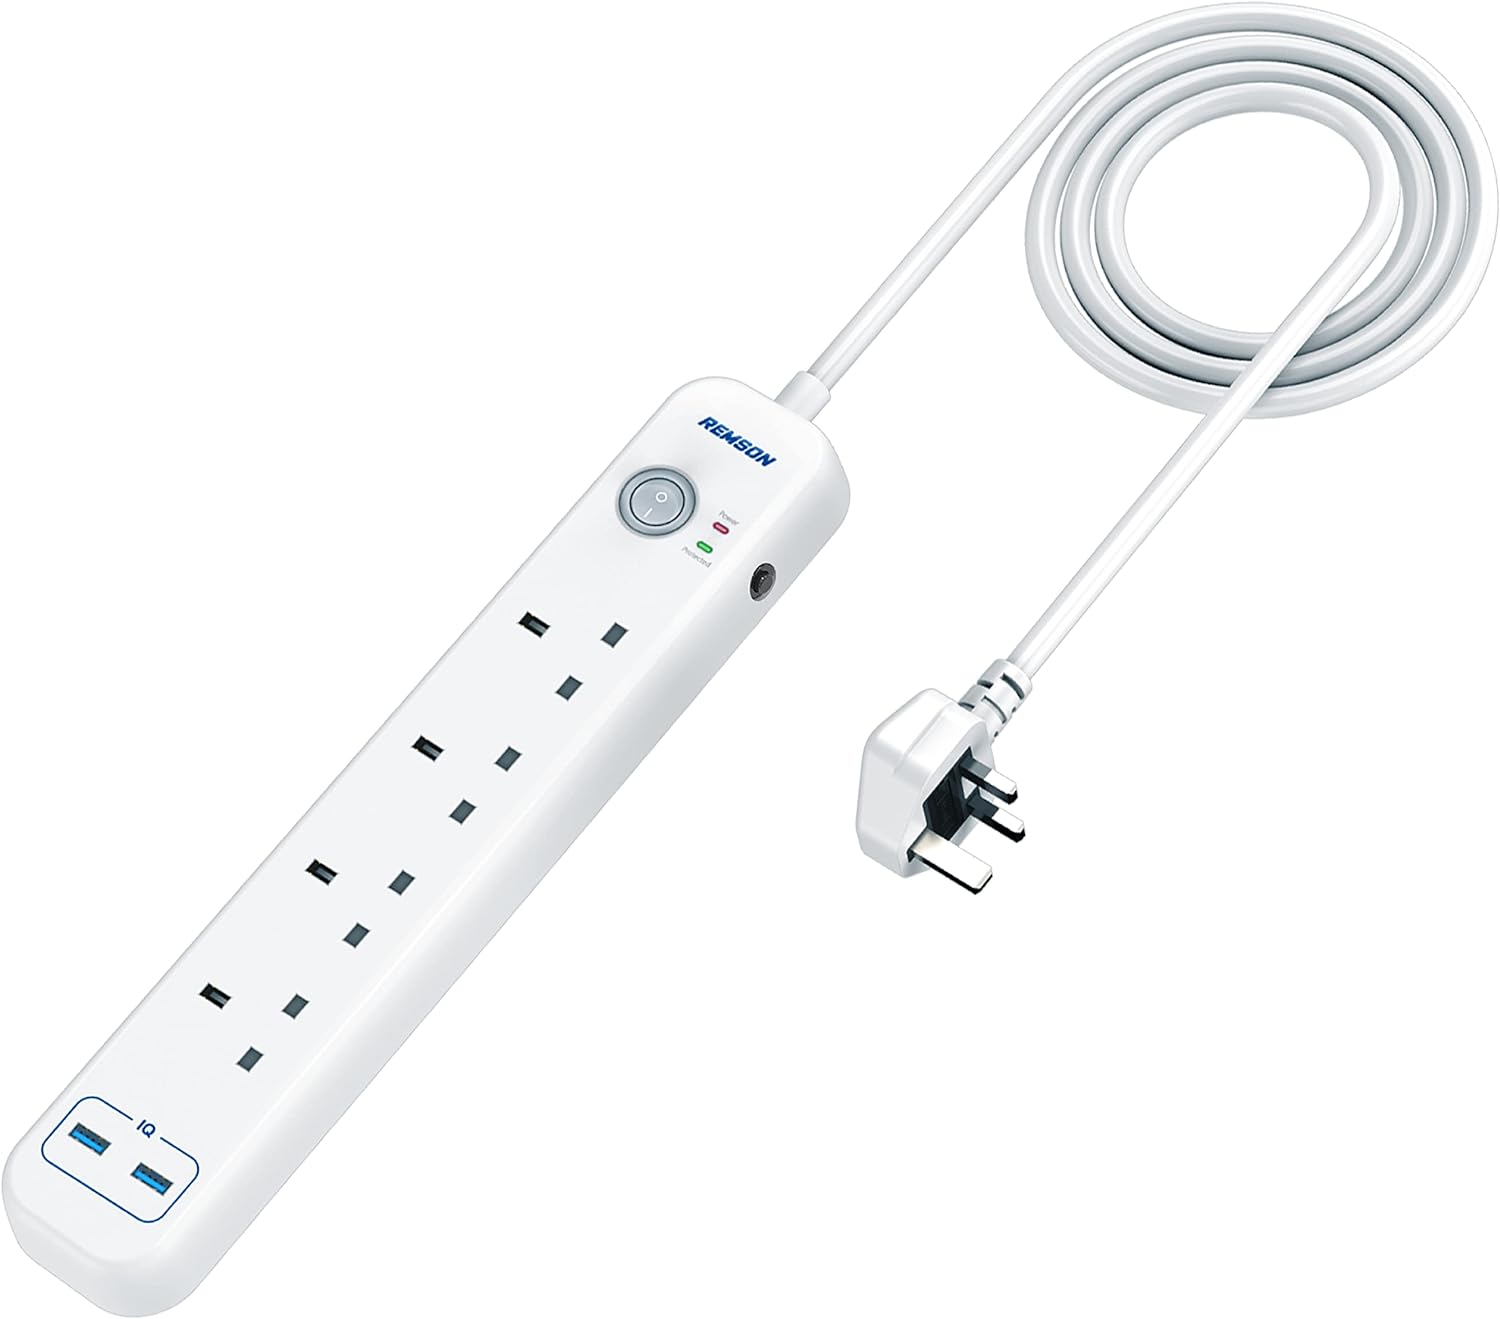 Remson Essential 6 Way 2 USB Ports + 4 AC Outlets Fast Charging Surge Protection 13A Power Strip - White